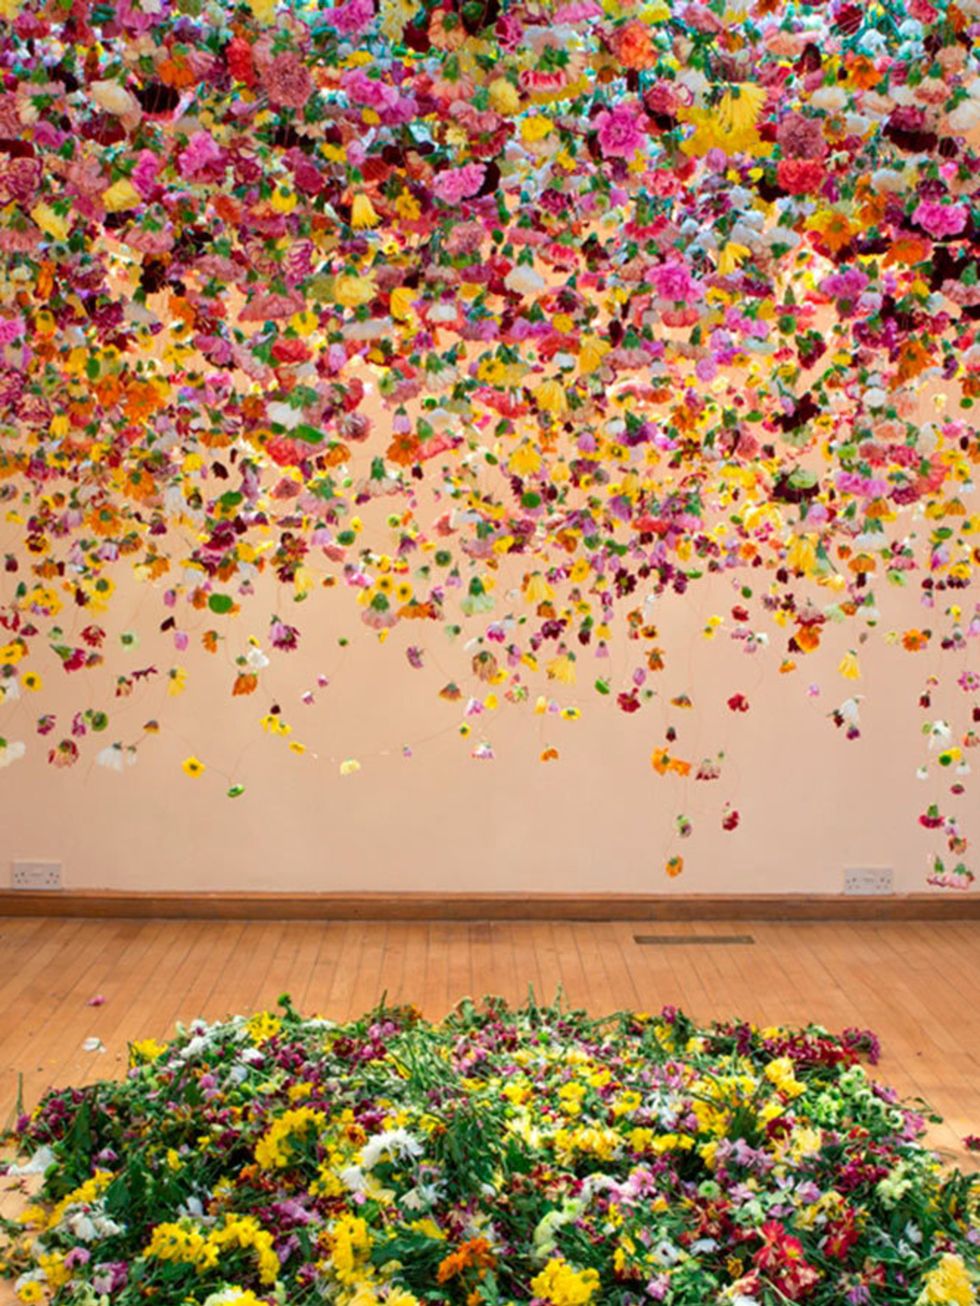 <p>EXHIBITION: Floral Cascade at St Christophers Place</p>

<p>This weekend, were bringing you flowers. And not from the supermarket, either  this weekend, were bringing you flowers from THE SKY. Well, more accurately, floral artist Rebecca Louise Law